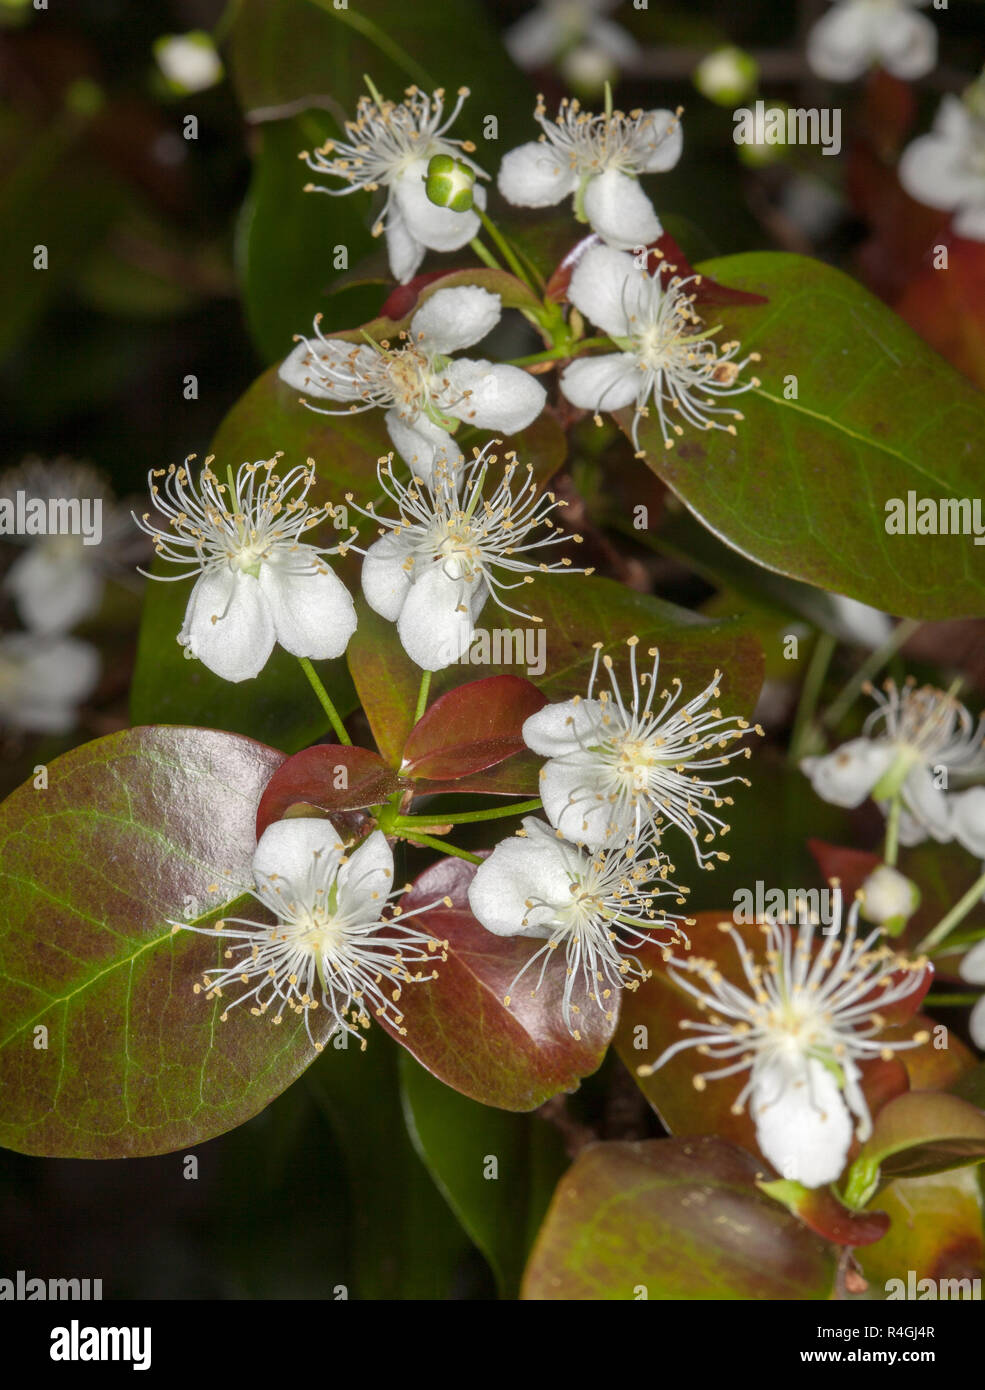 Cluster of beautiful white flowers of Eugenia uniflora, Brazilian cherry tree, on background of the tree's red-green foliage Stock Photo